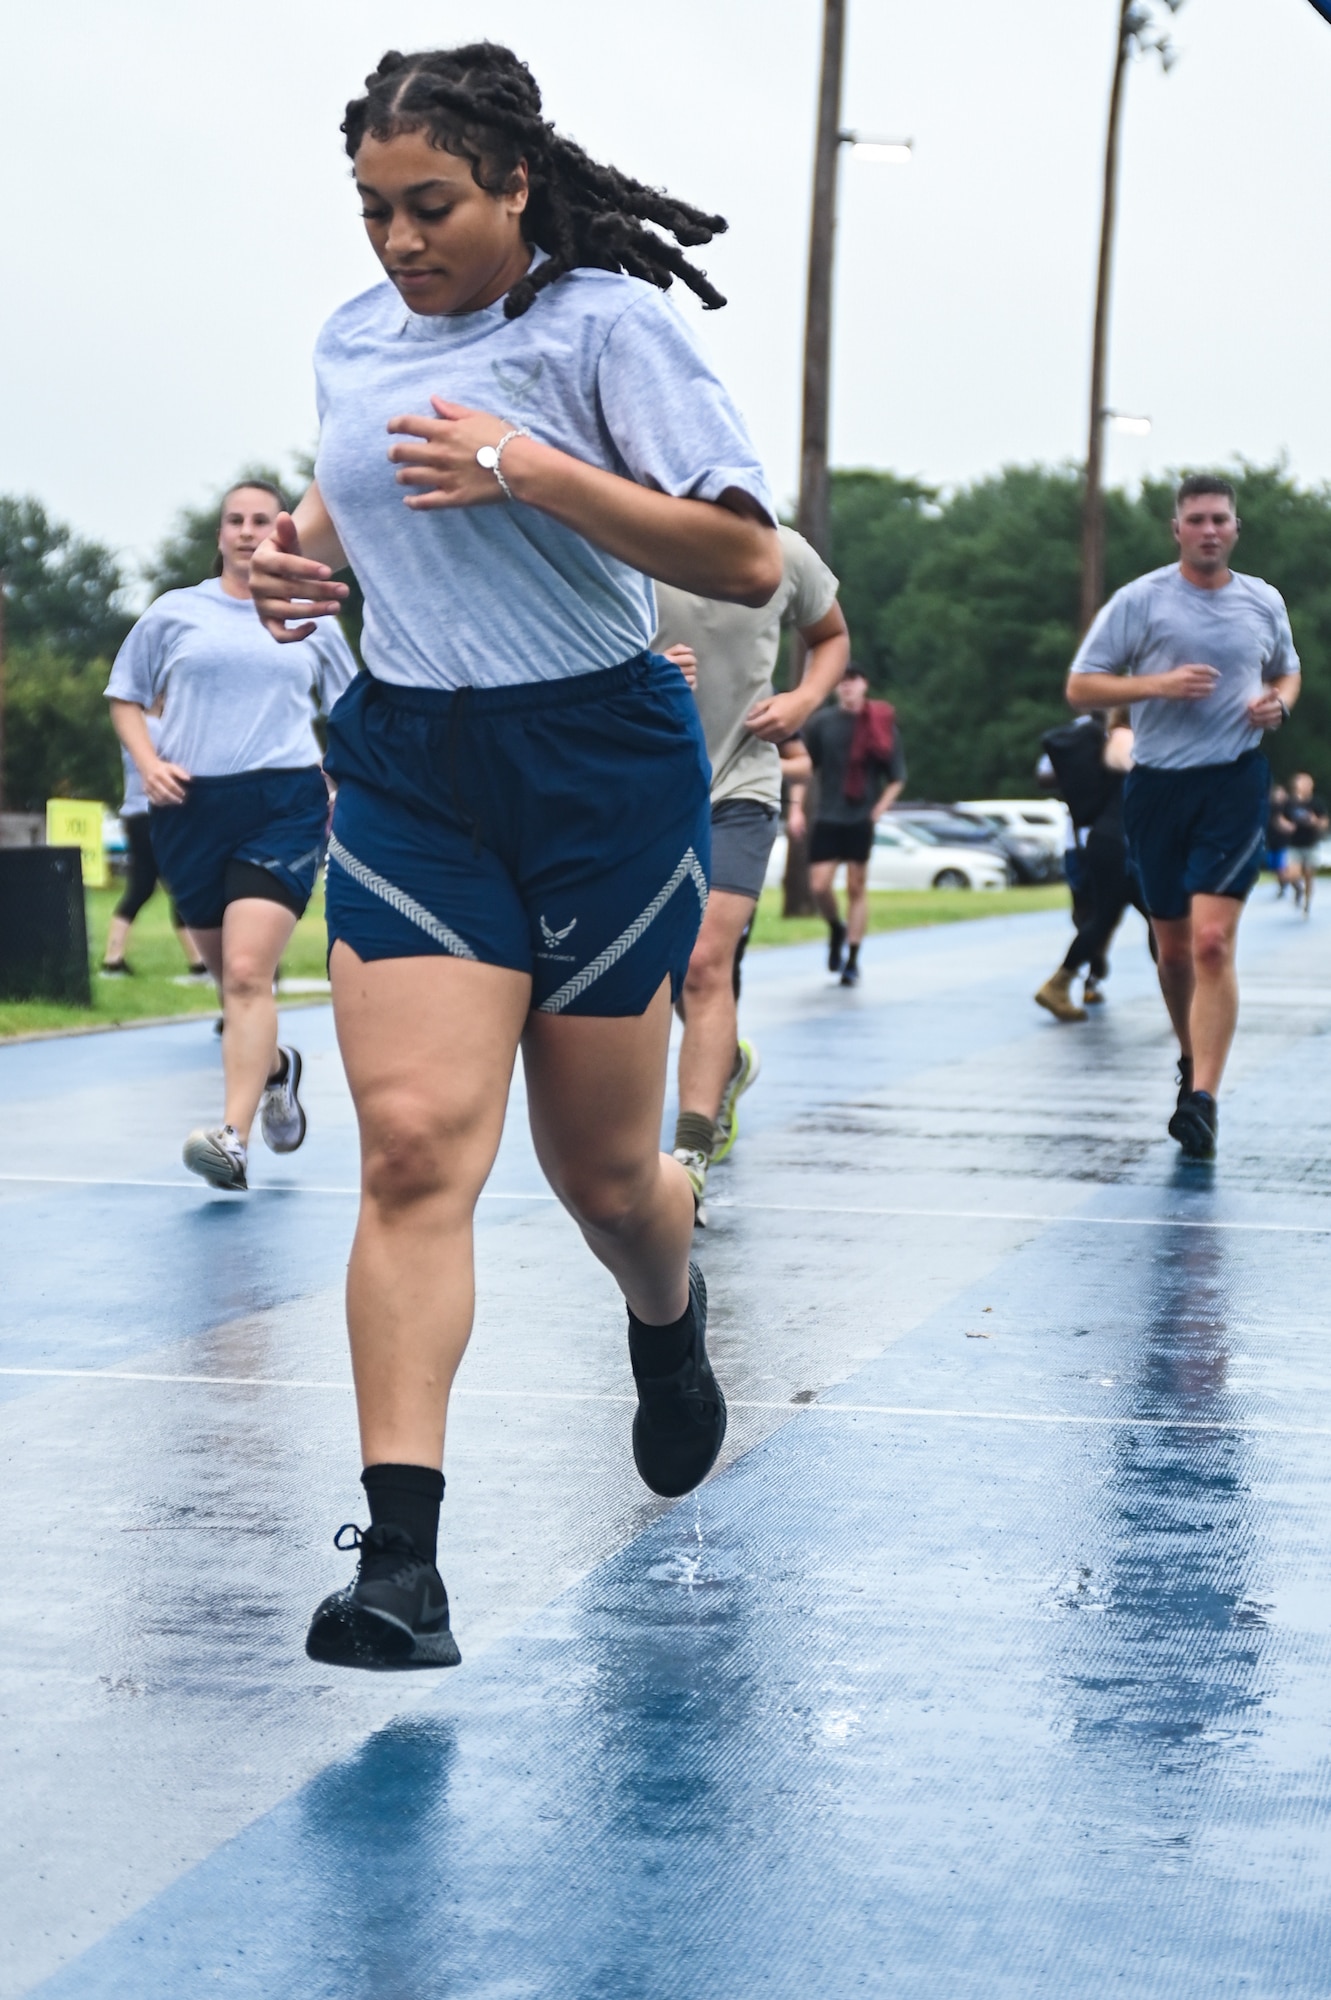 Barksdale Airmen run at the Laps For Life event at Barksdale Air Force Base, Louisiana, Sep. 17, 2021.